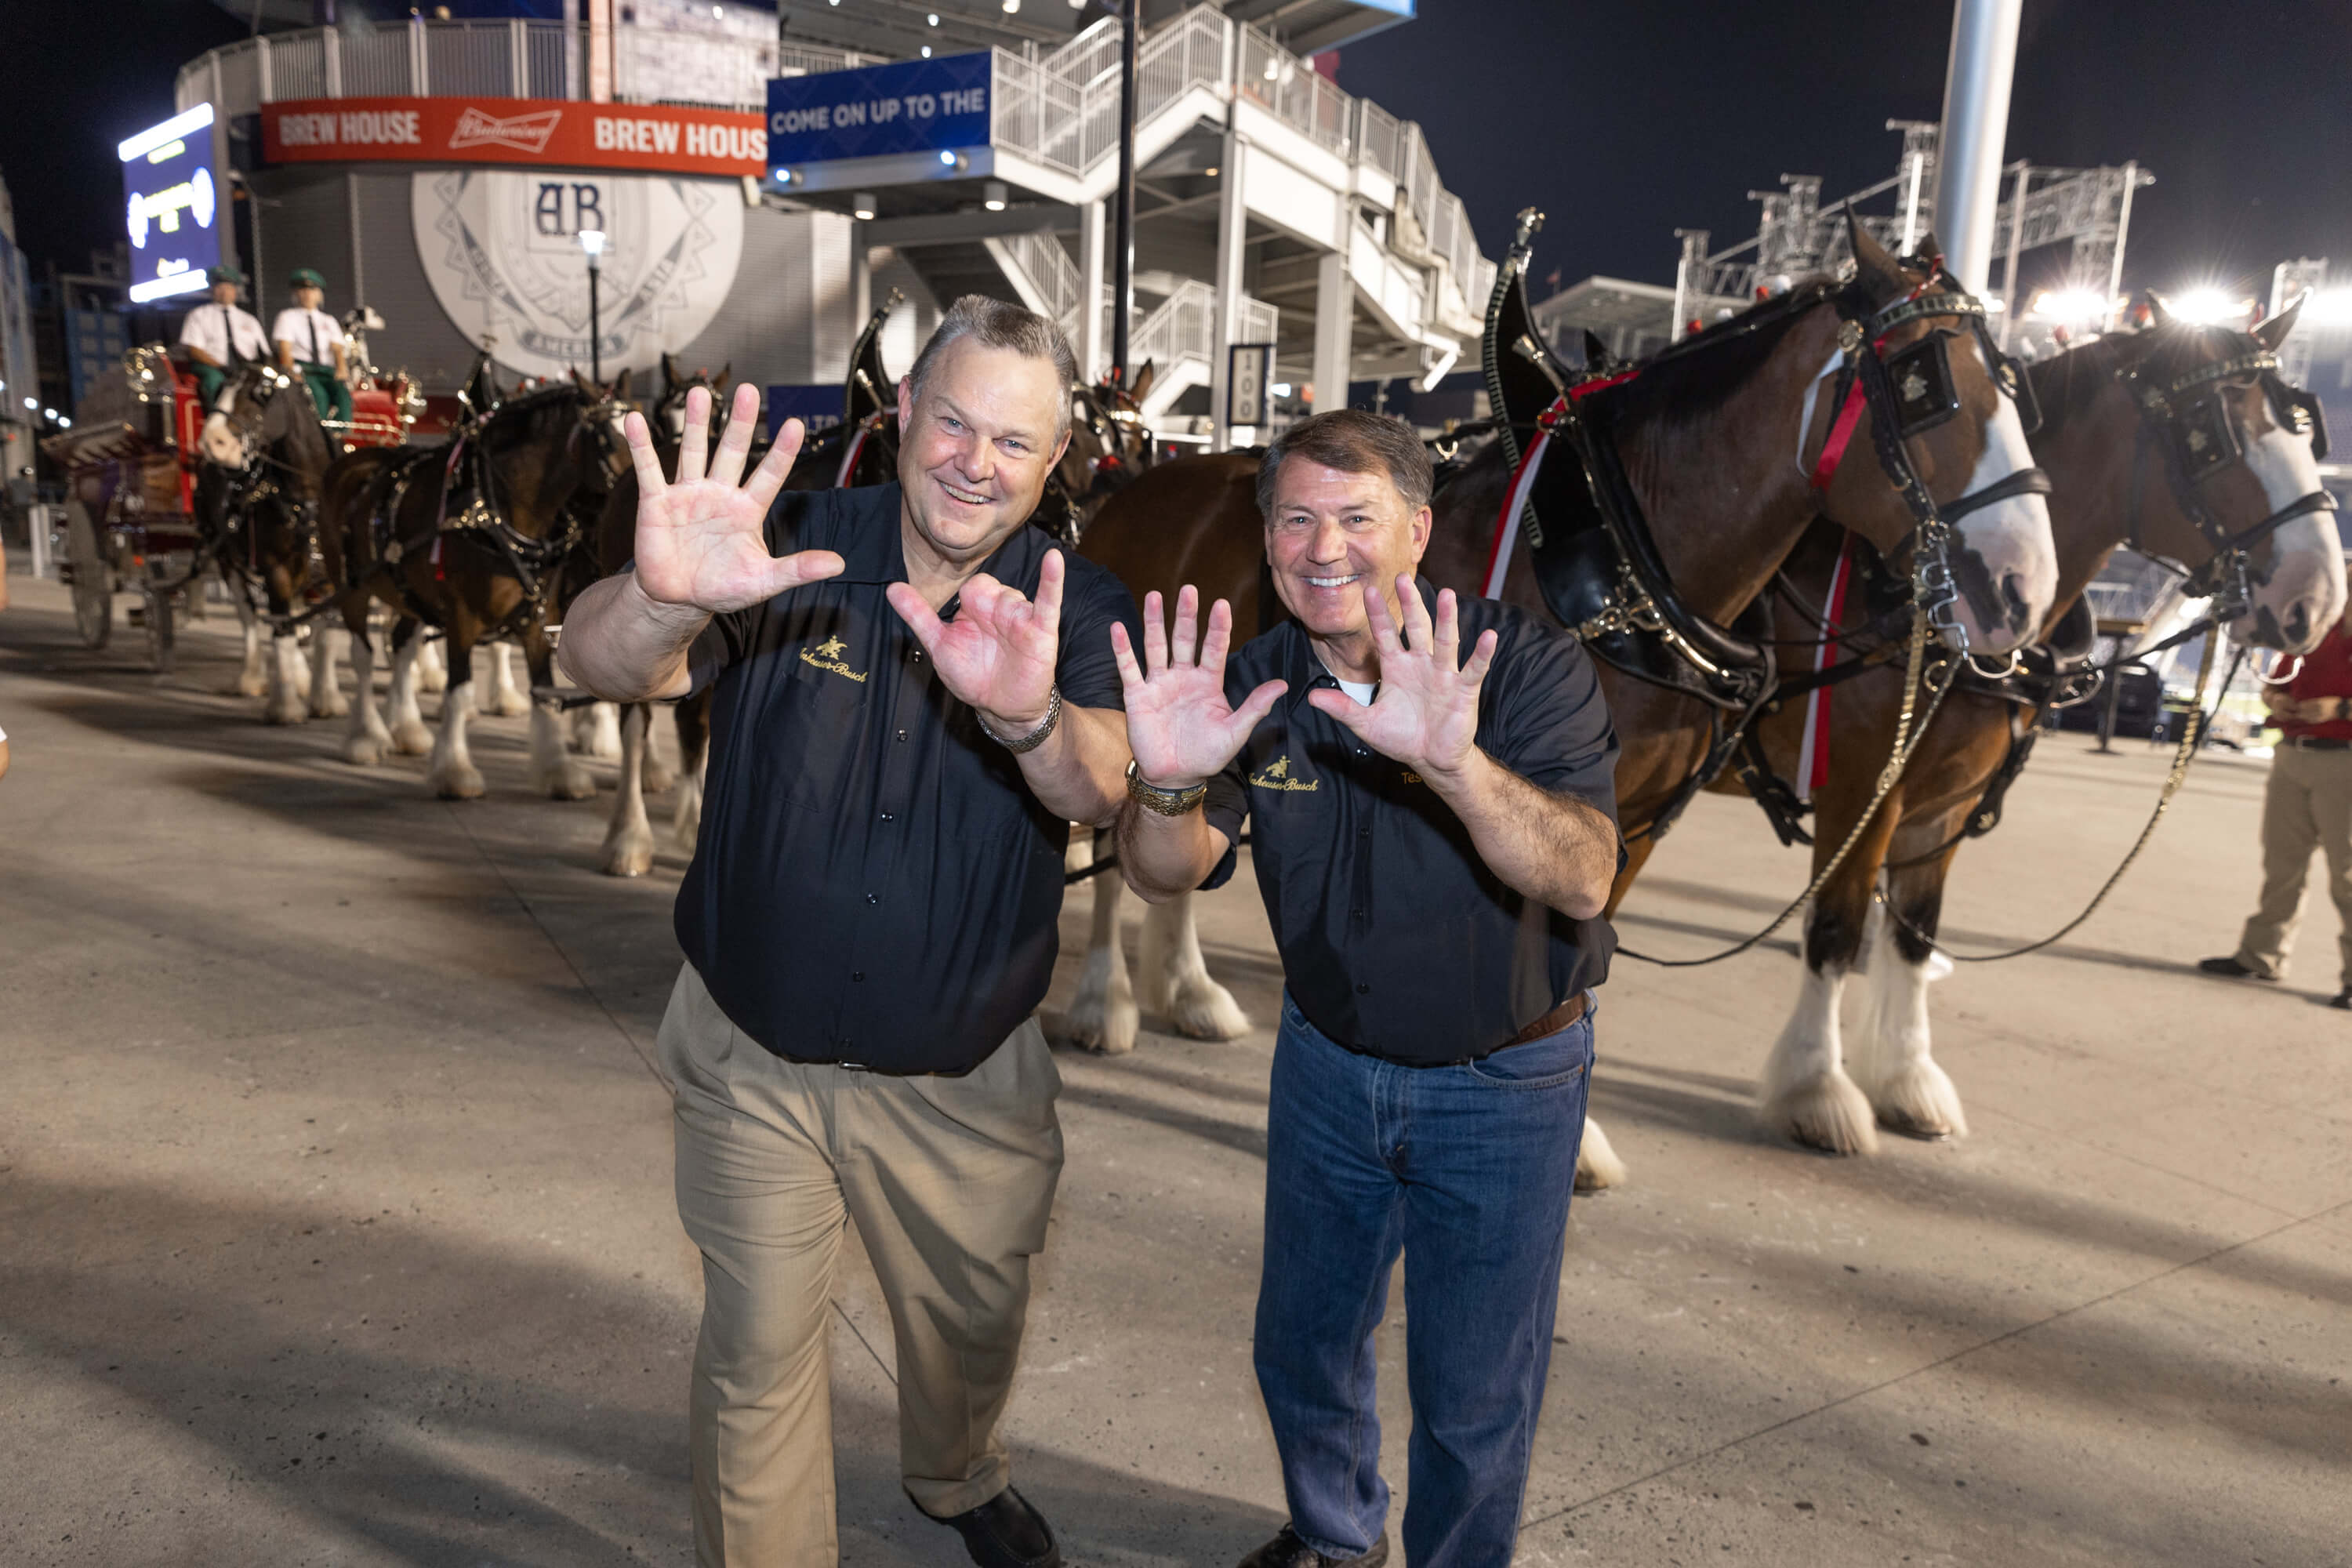 Senator Jon Tester and Bipartisan Buddy Senator Mike Rounds Win Anheuser-Busch Brew Democracy Cup with Fort Collins Brewing Team